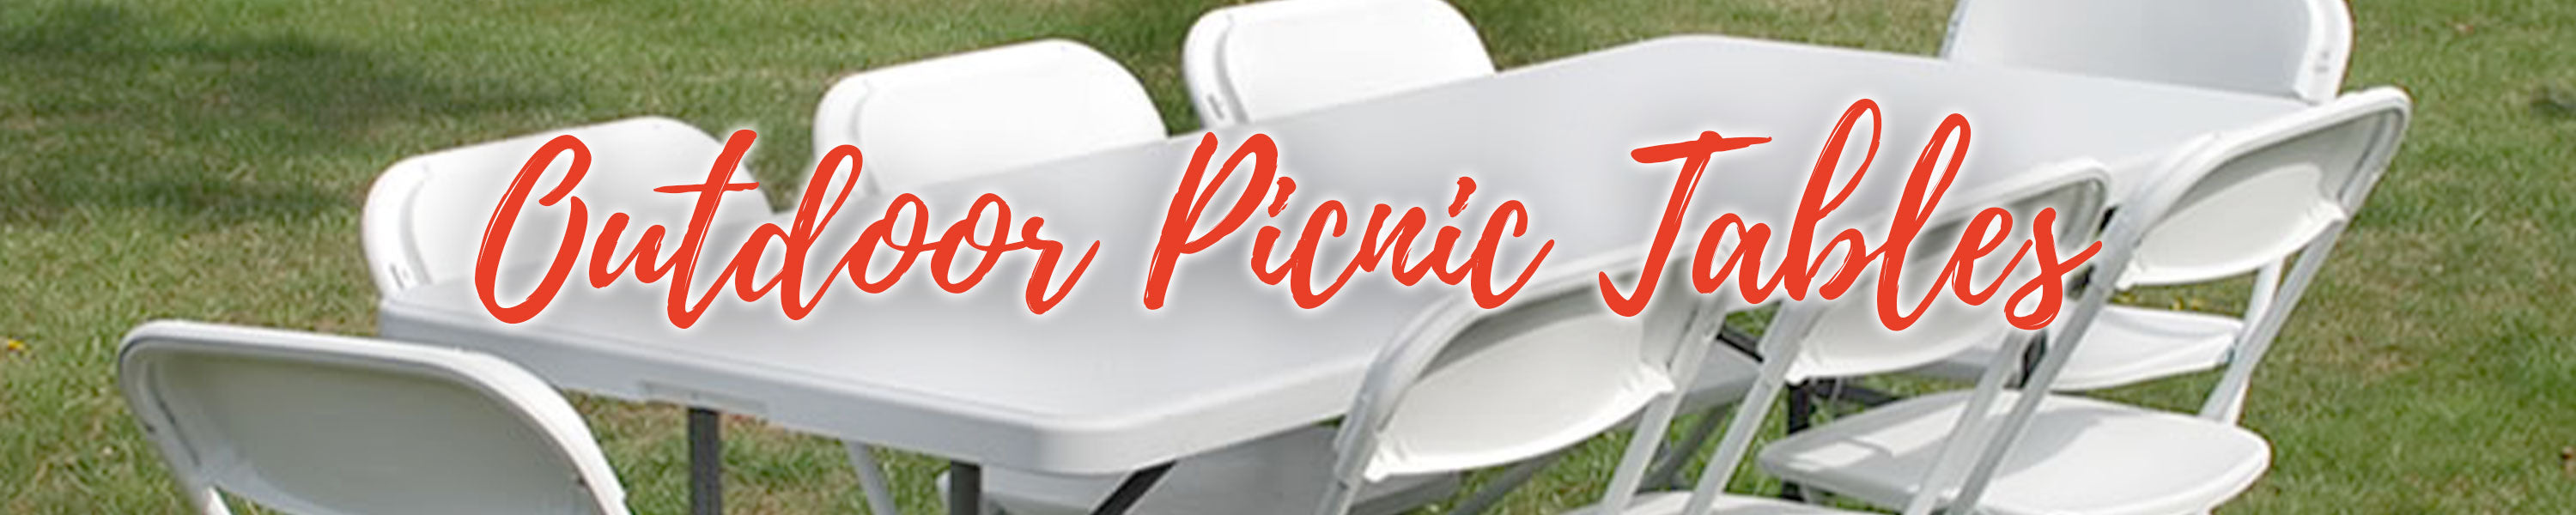 Buy Outdoor Picnic Tables Online at Great Price in India - UrbanCart